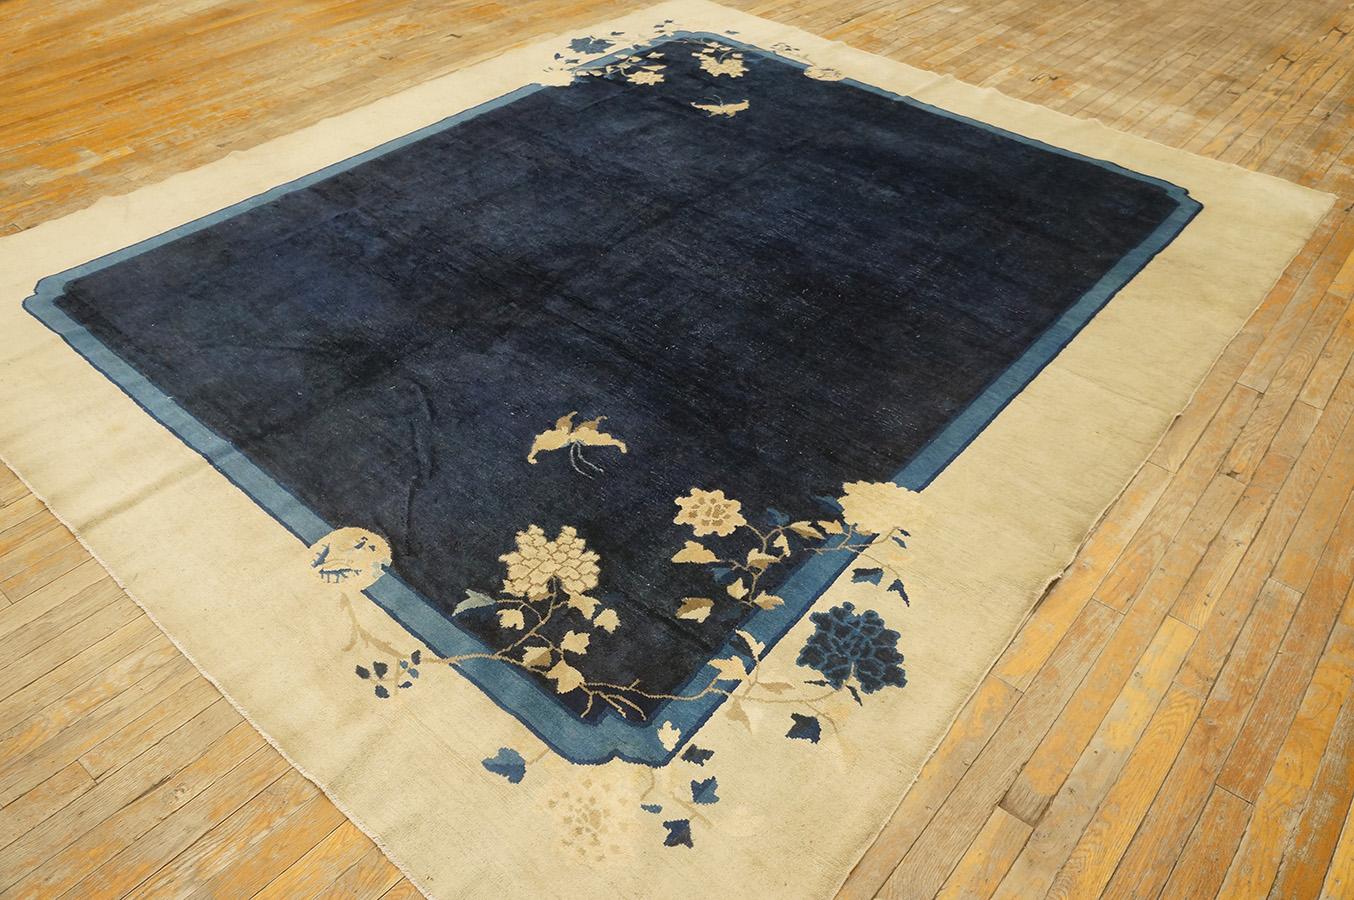 1920s Chinese Peking Rug in Wool & Silk ( 7' 10'' x 9' 6'' - 240 x 290 cm )
It has some color adjustment.
   